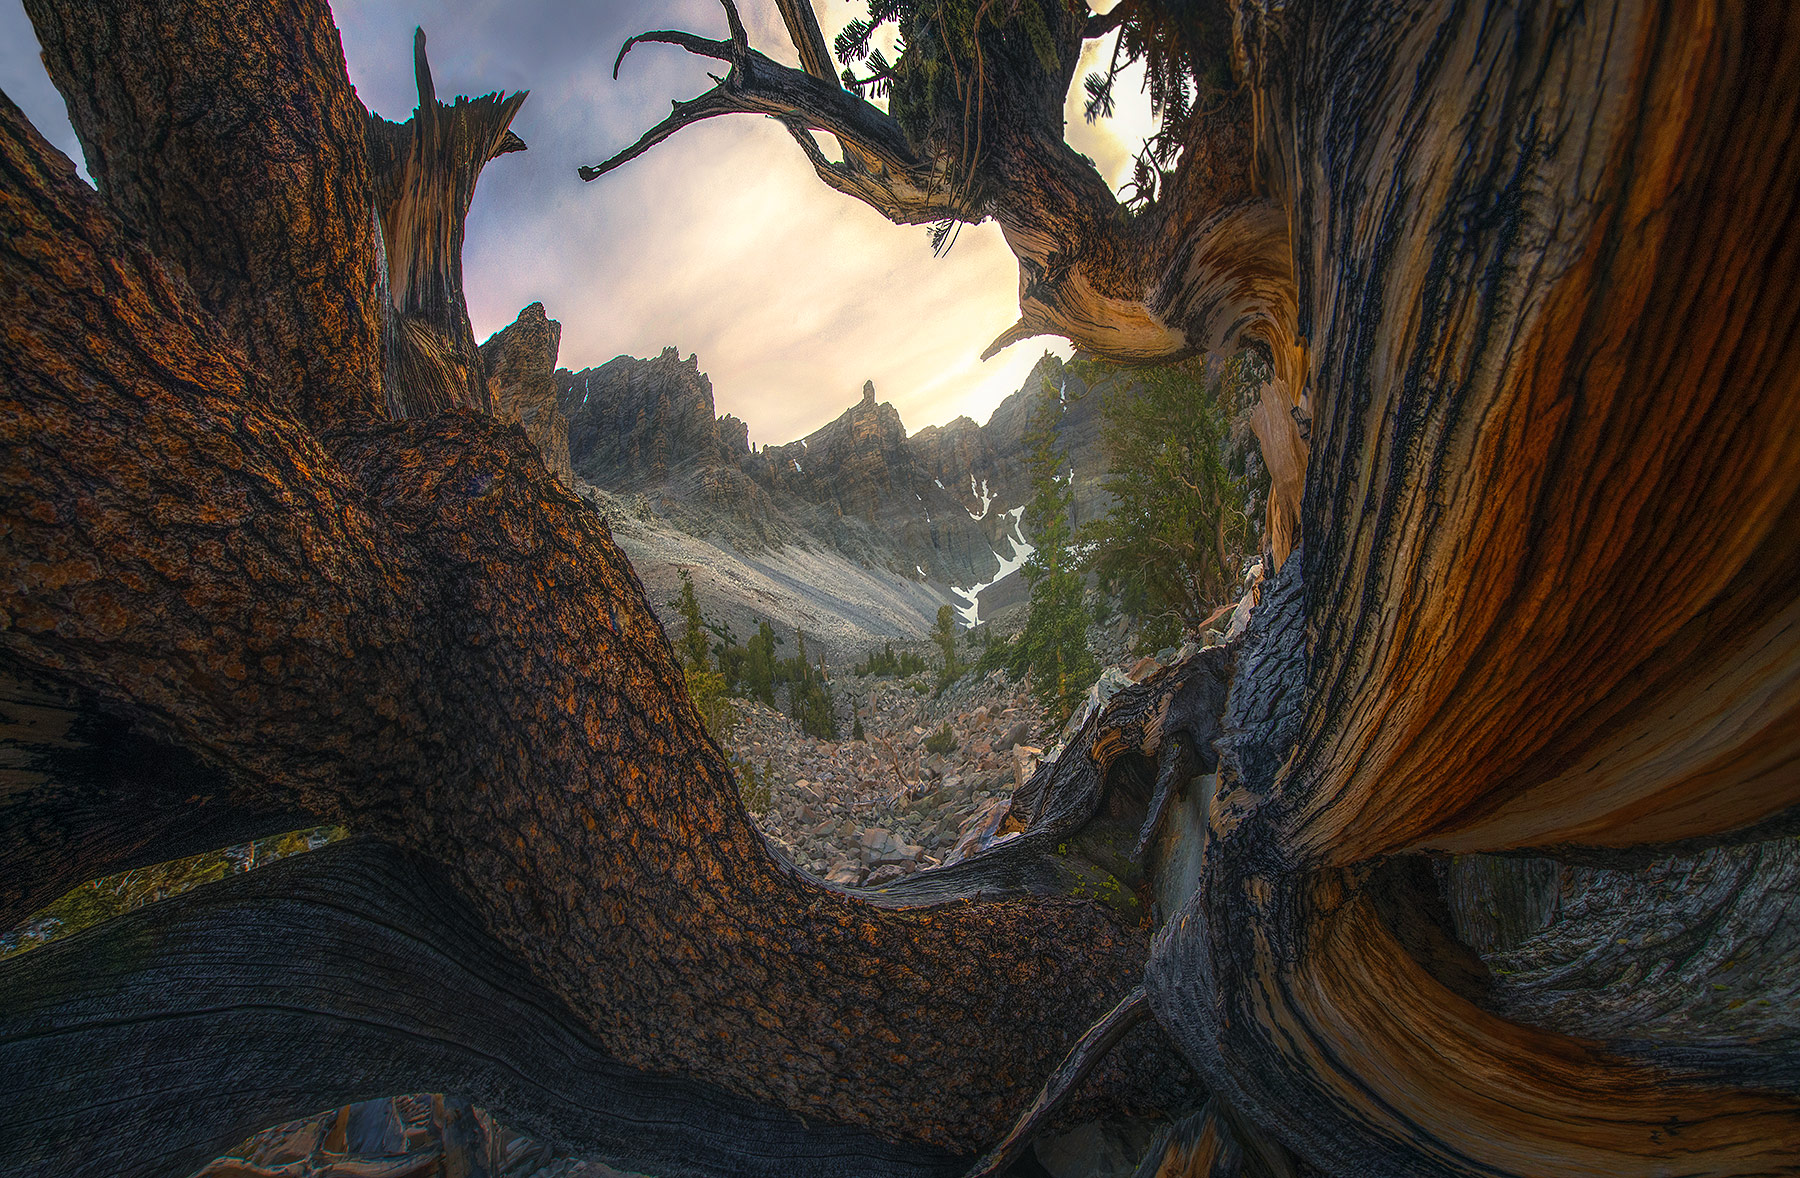 Bristlecone Pines are the oldest trees on Earth. &nbsp;Here you can find them set amidst beautiful mountains.&nbsp;